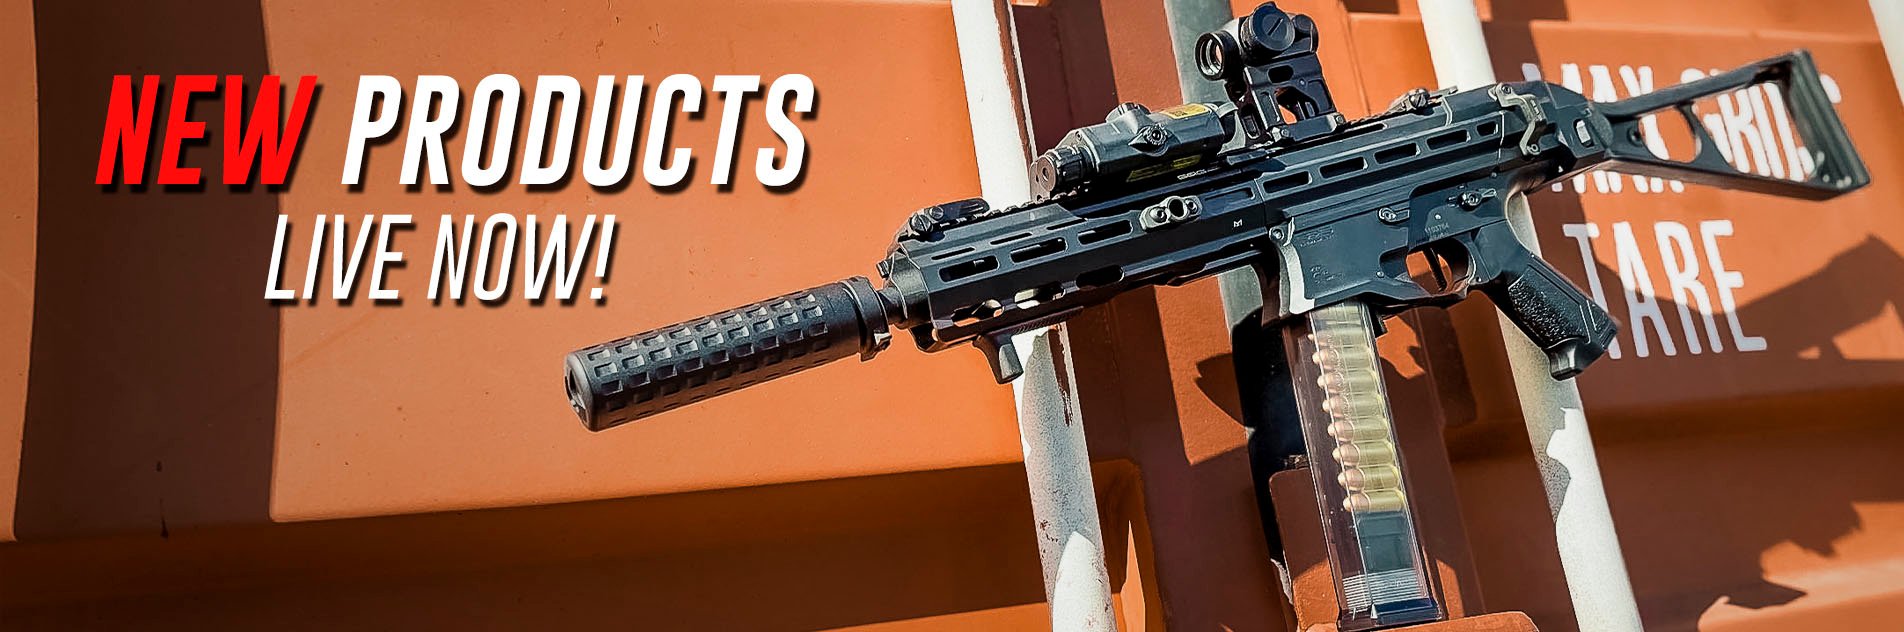 Airsoft Gi Airsoft Guns Store For Airsoft Enthusiasts